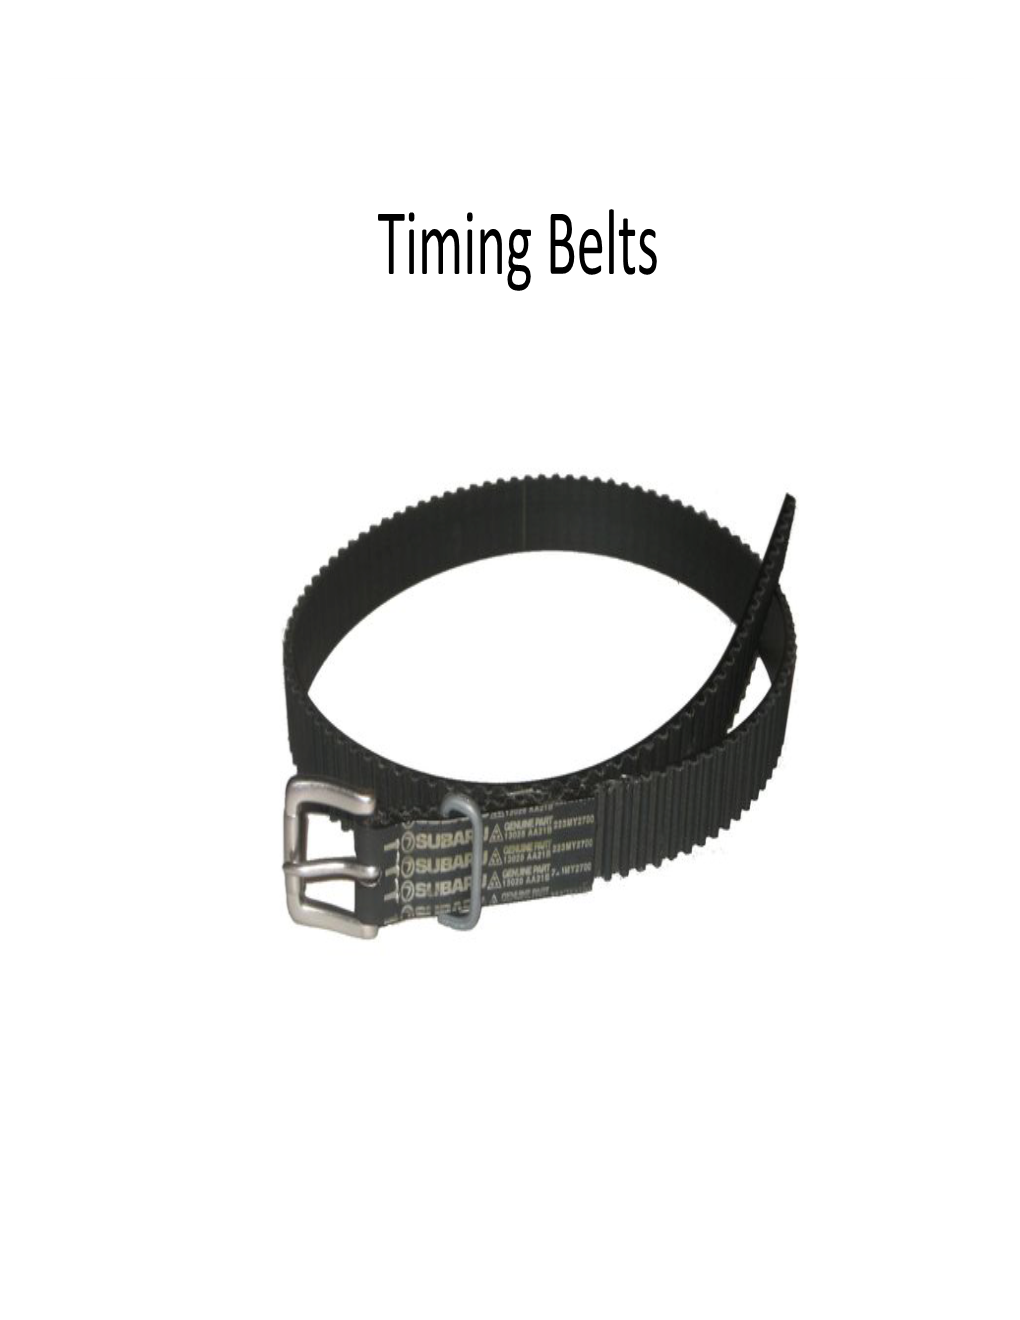 Timing Belts • All Timing Belts Need Periodic Replacement